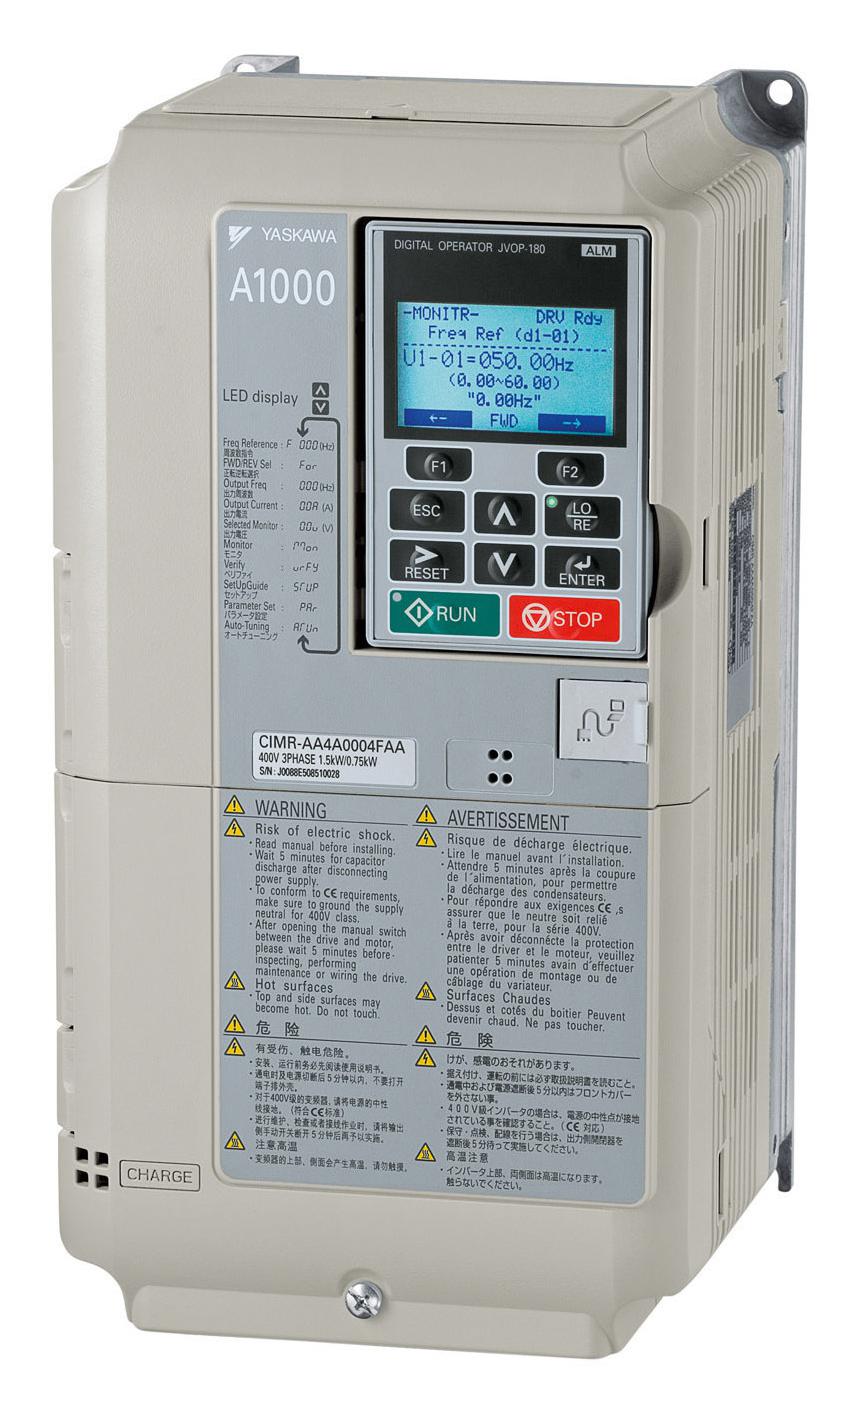 CIMR-AC4A0208AAA AC MOTOR SPEED CONTROLLERS OMRON